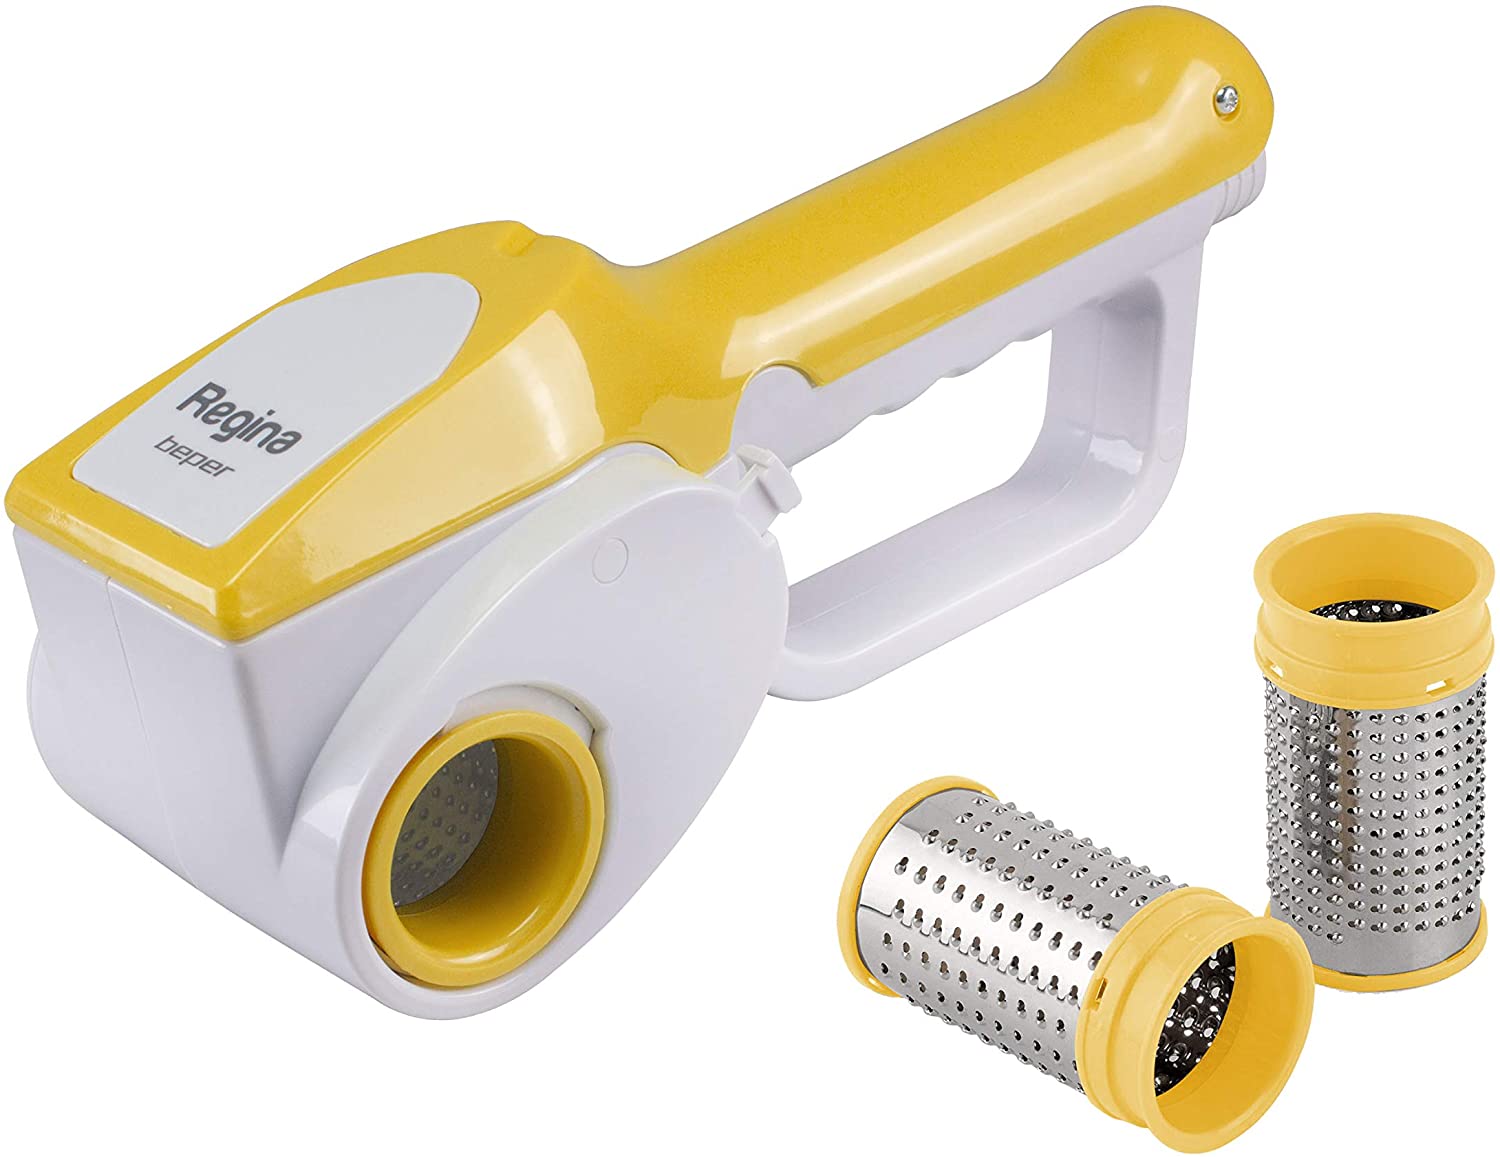 Beper 90.071 Rechargeable Grater, Yellow/White